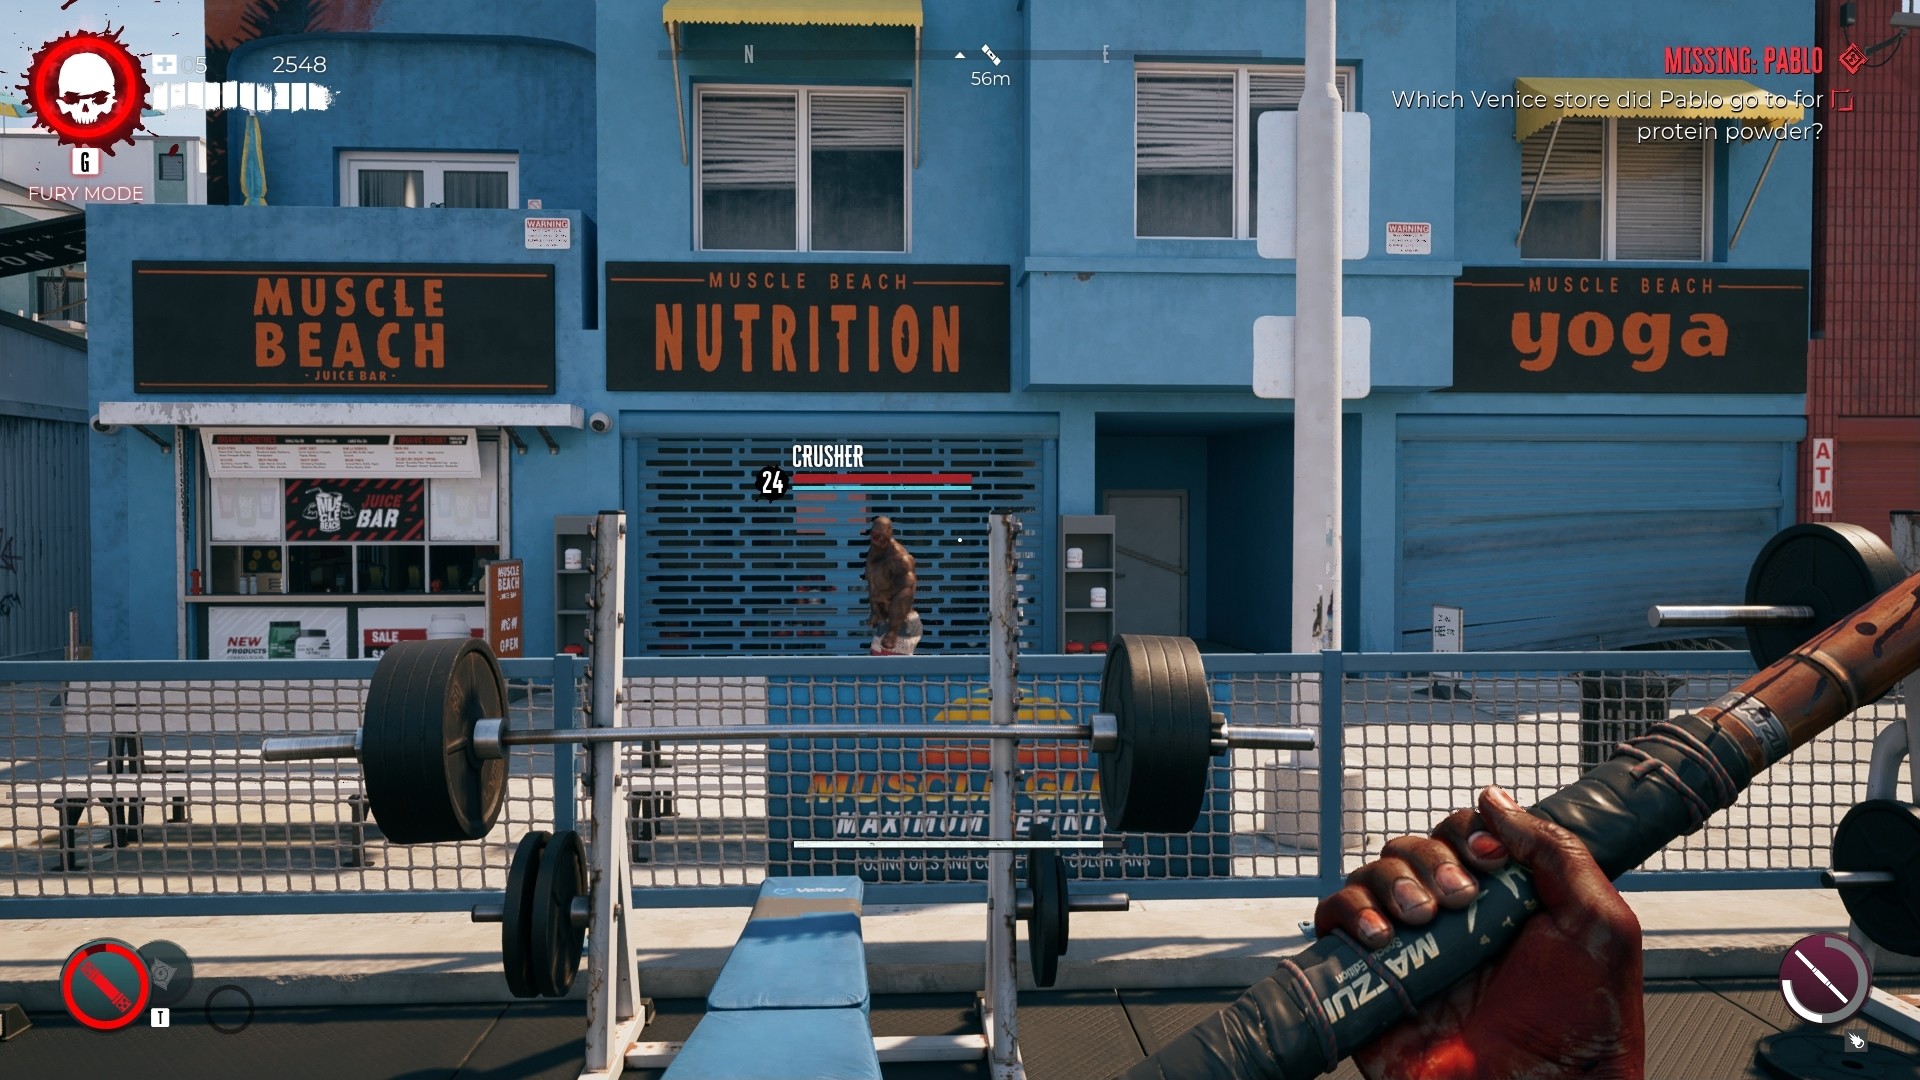 A screenshot from Dead Island 2 showing a store called Muscle Beach Nutrition next to an outdoor gym. 